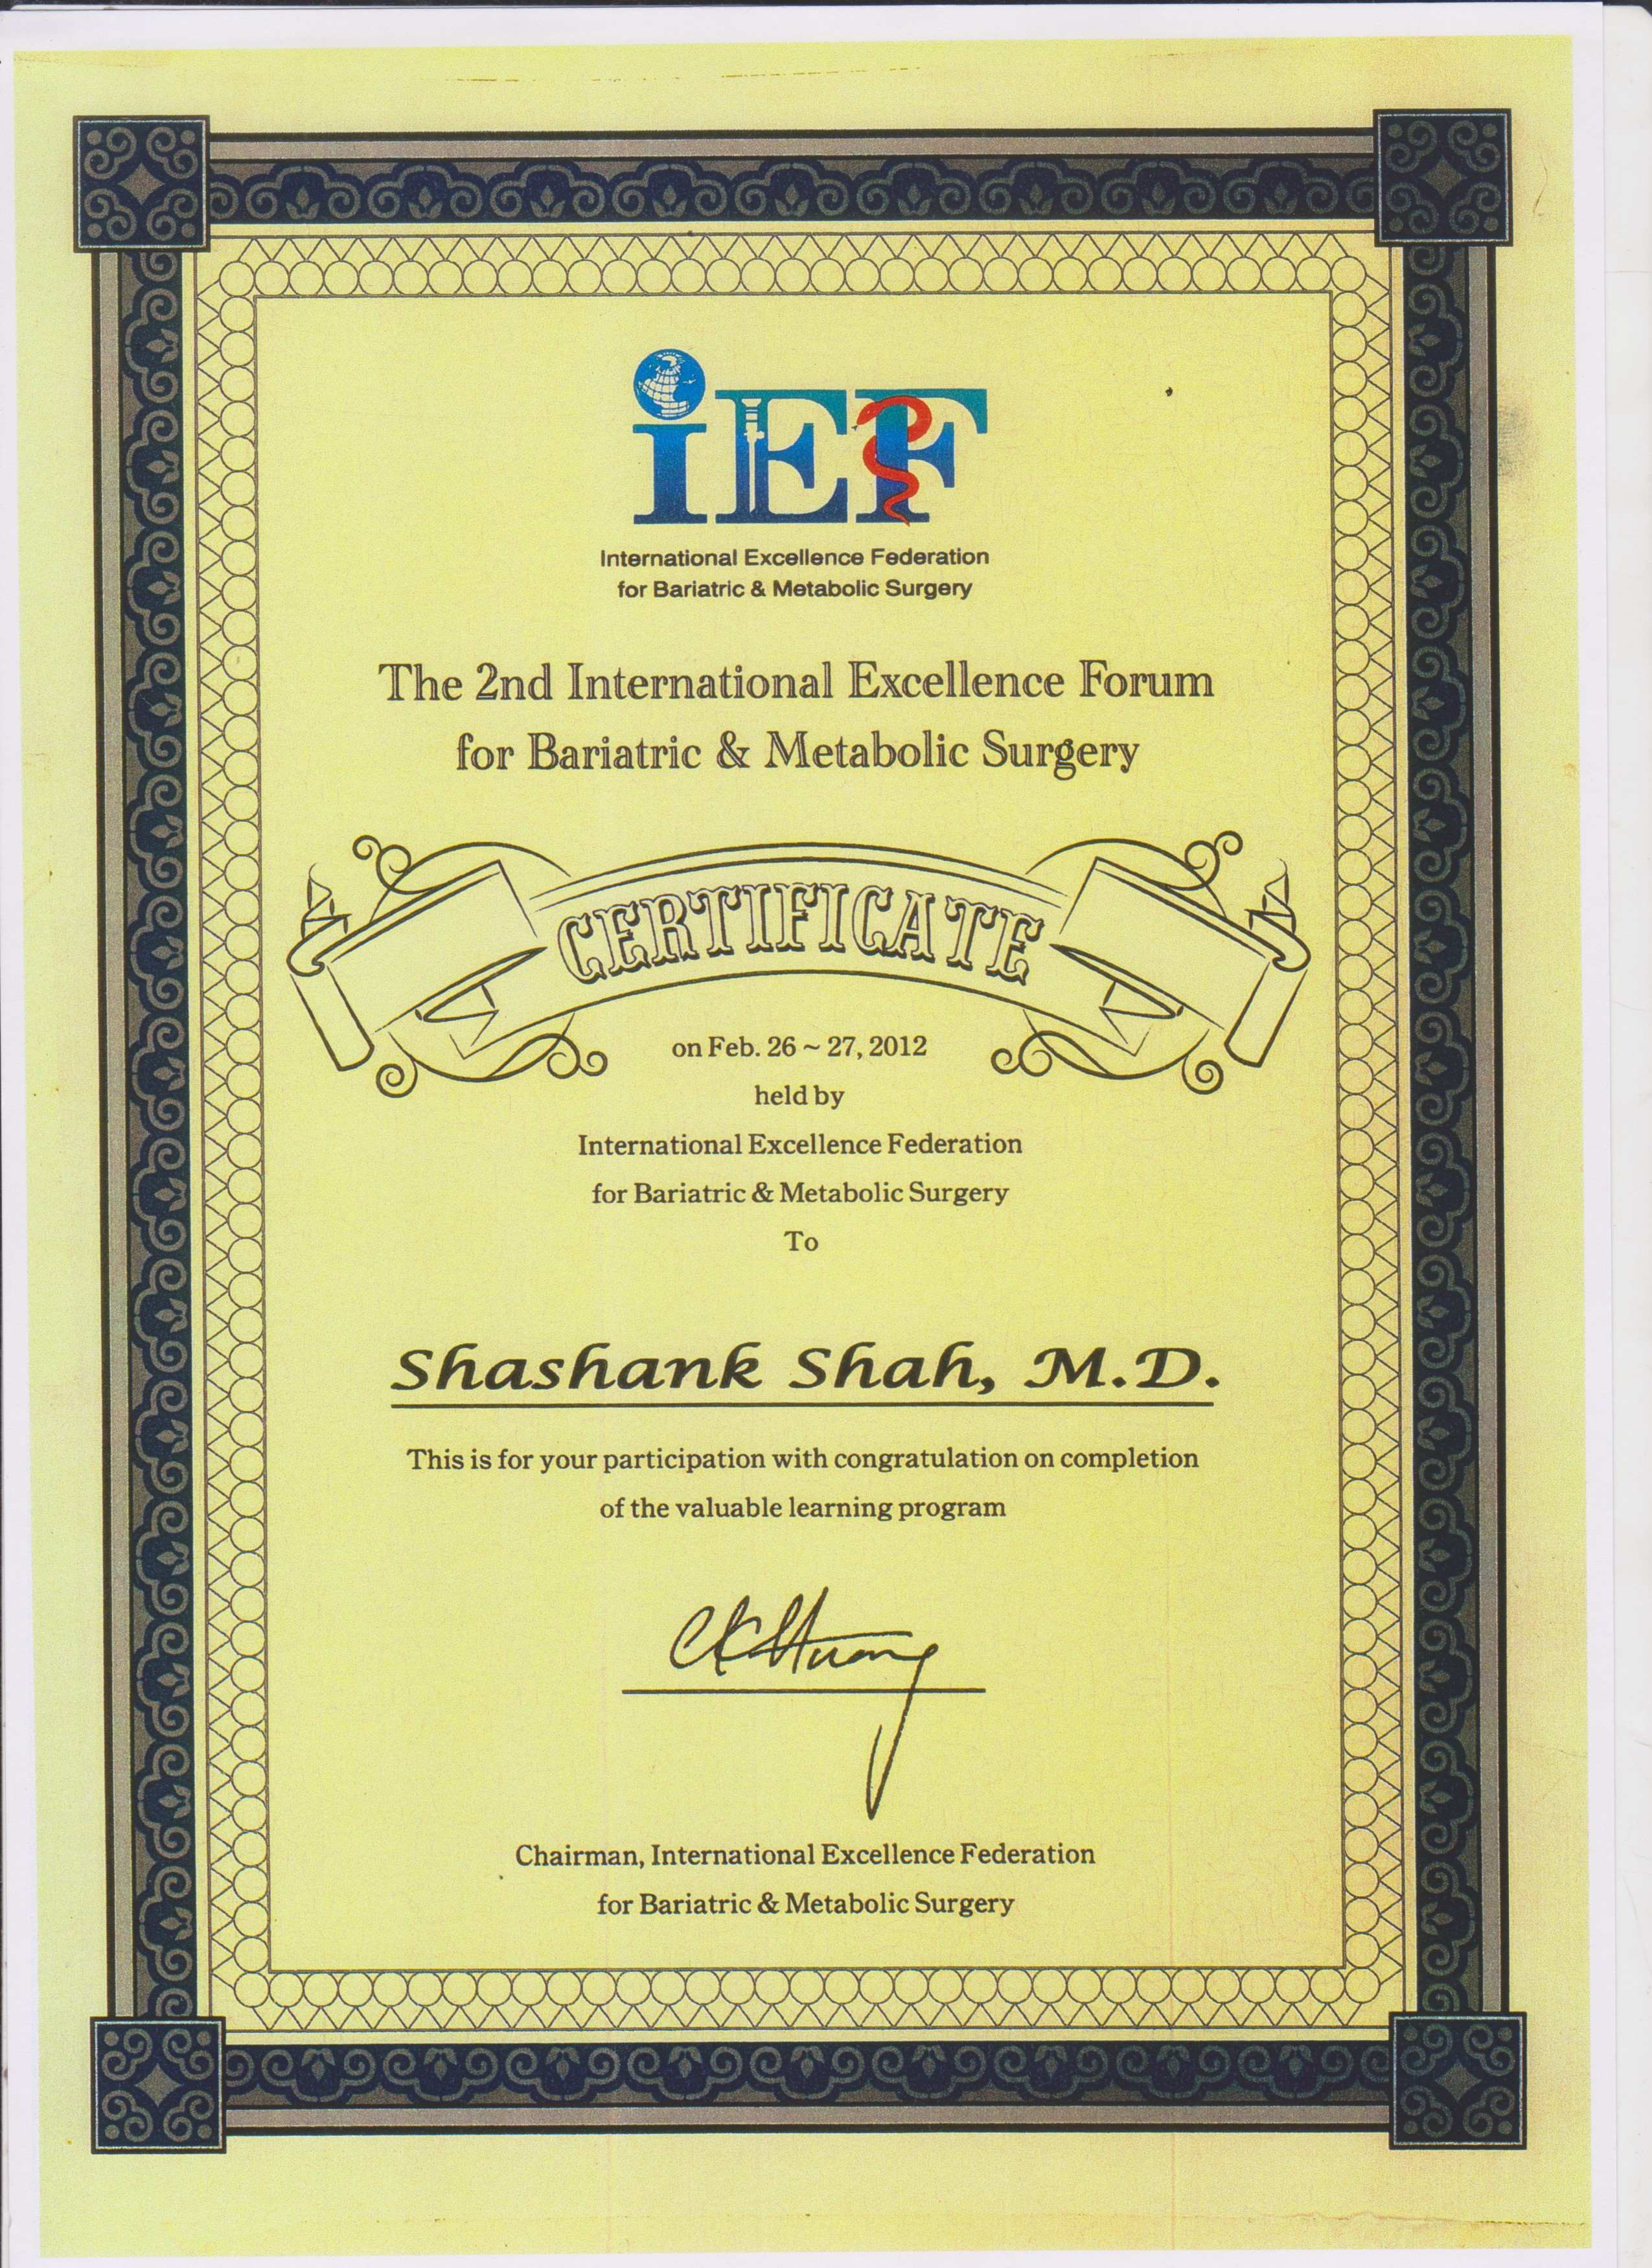 DR Shashank Shah participated in the 2nd International Excellence Federation for Metabolic and Bariatric Surgery held in 2012